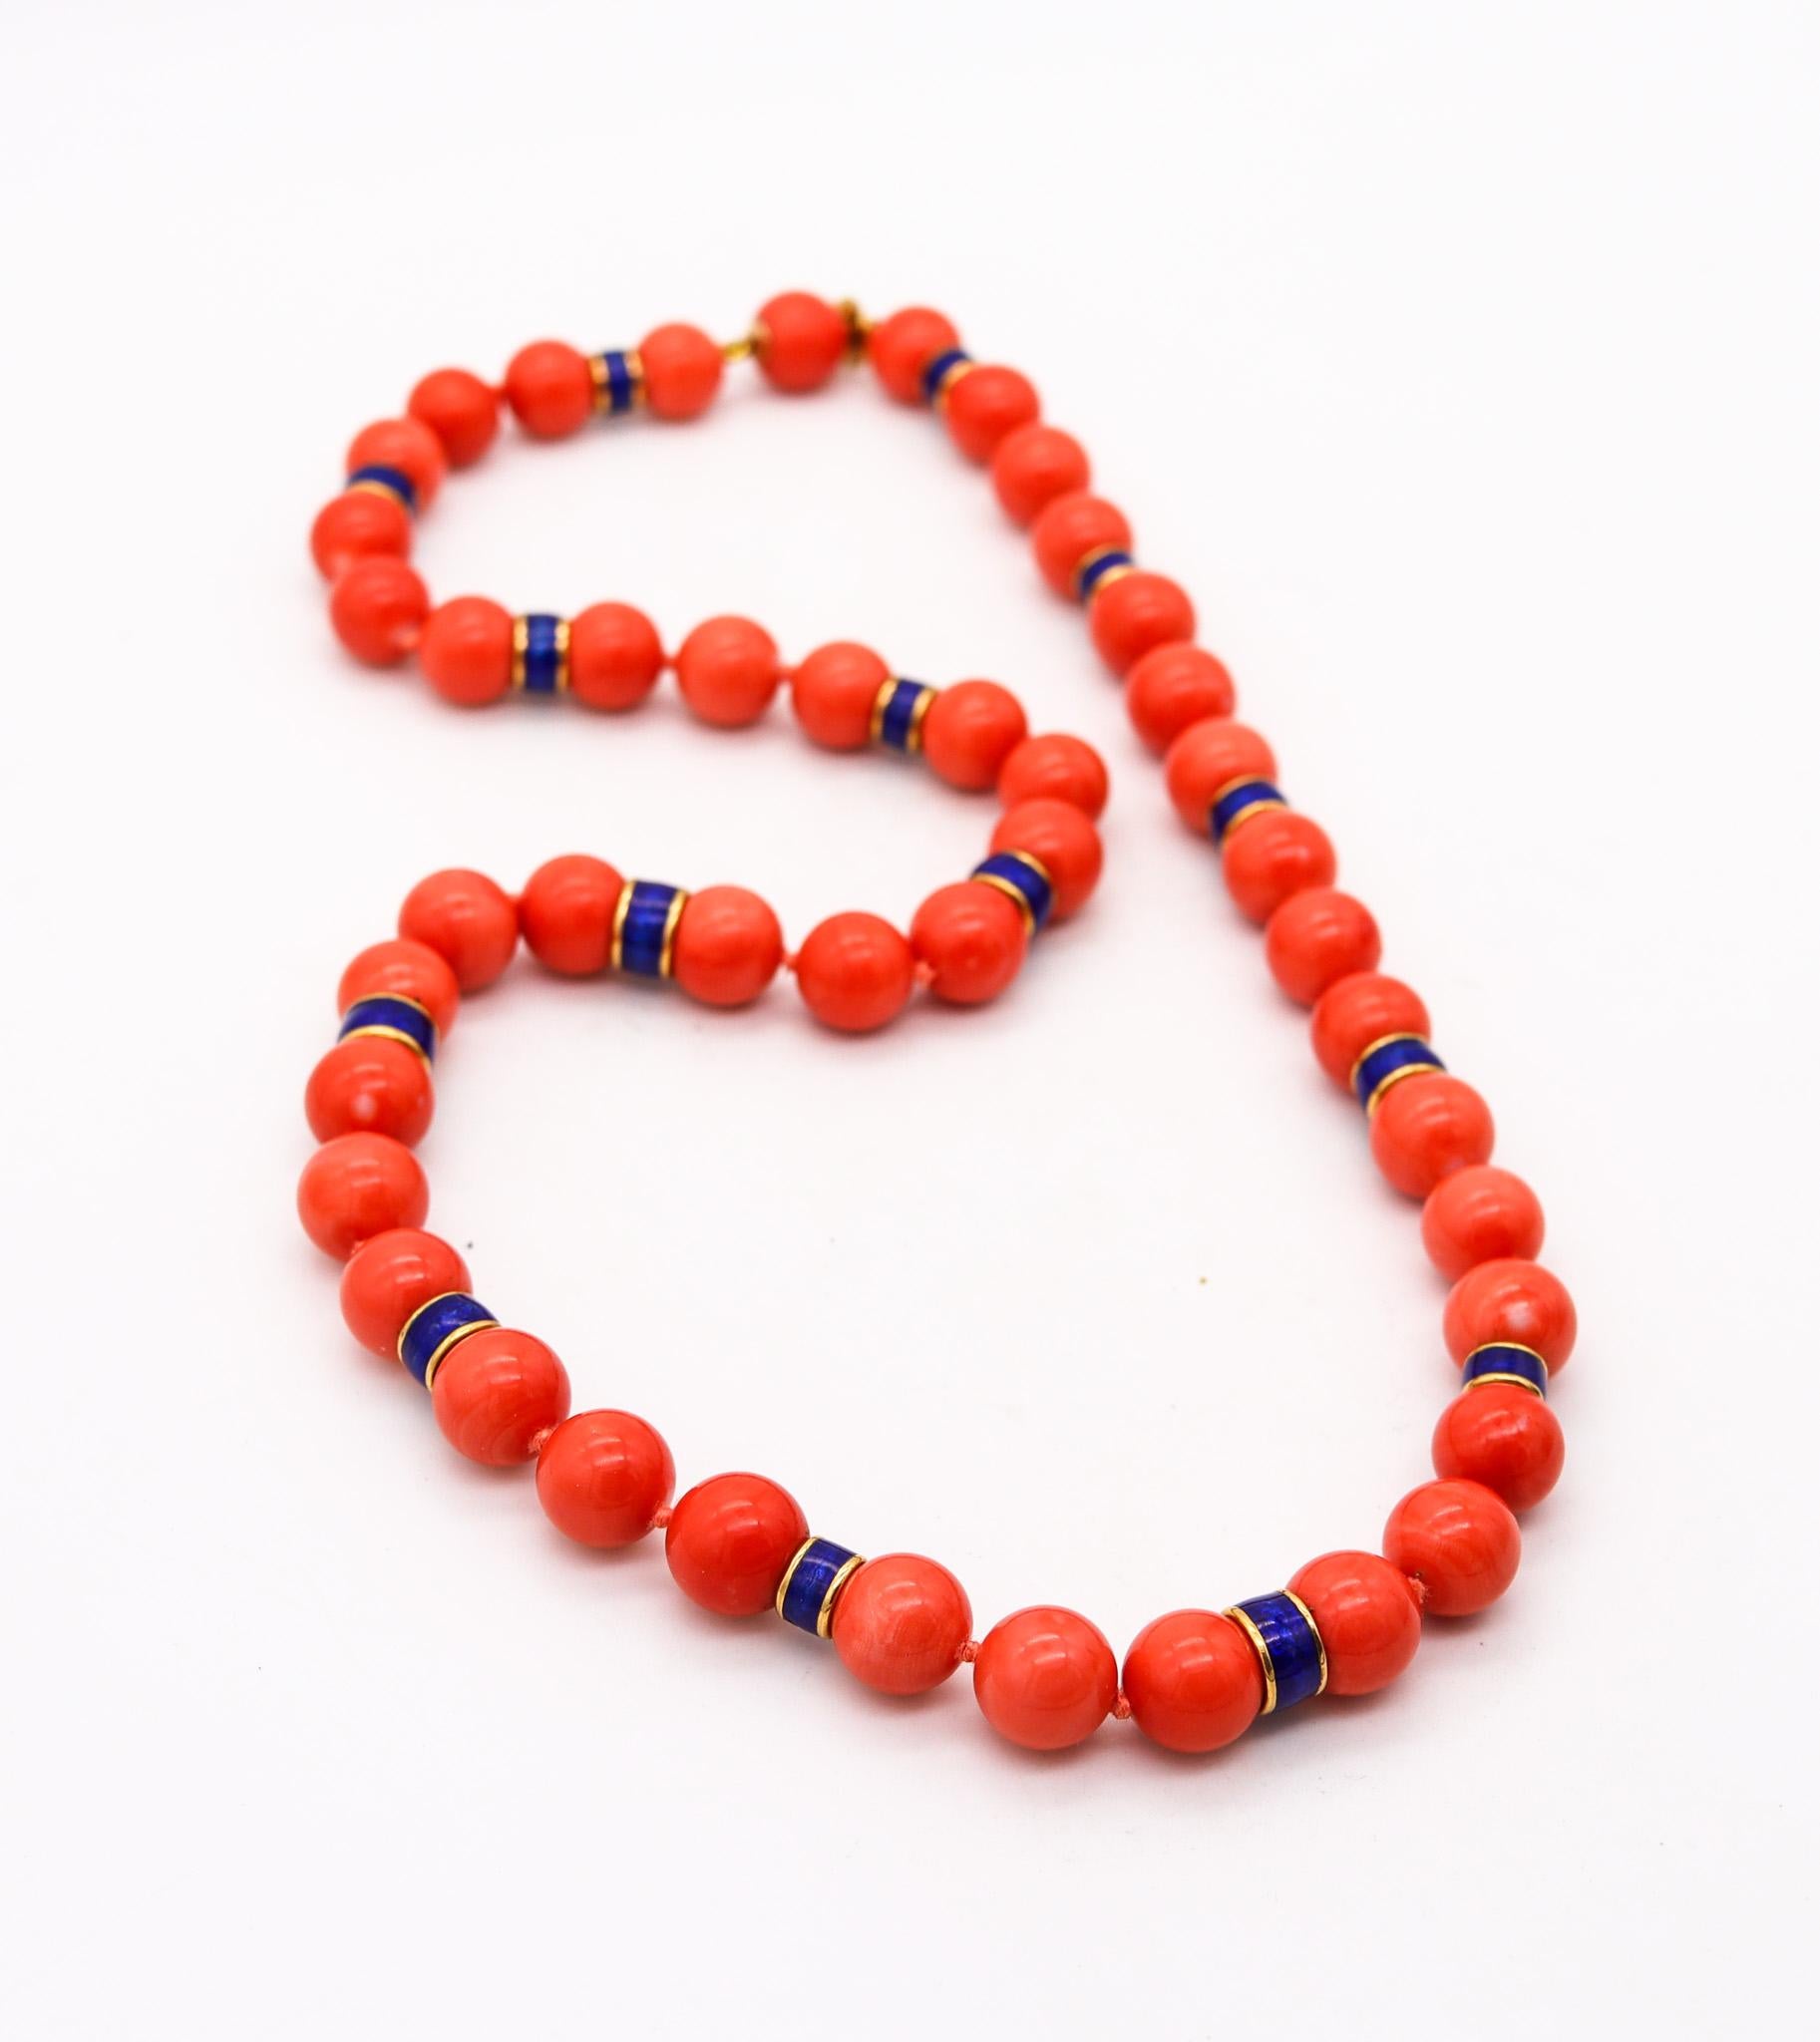 Coral necklace designed by David Webb.

Magnificent necklace of Mediterranean coral, created in New York City at the jewelry atelier of David Webb, back in the 1960. This fabulous necklace is composed by forty five perfectly matched beads of red